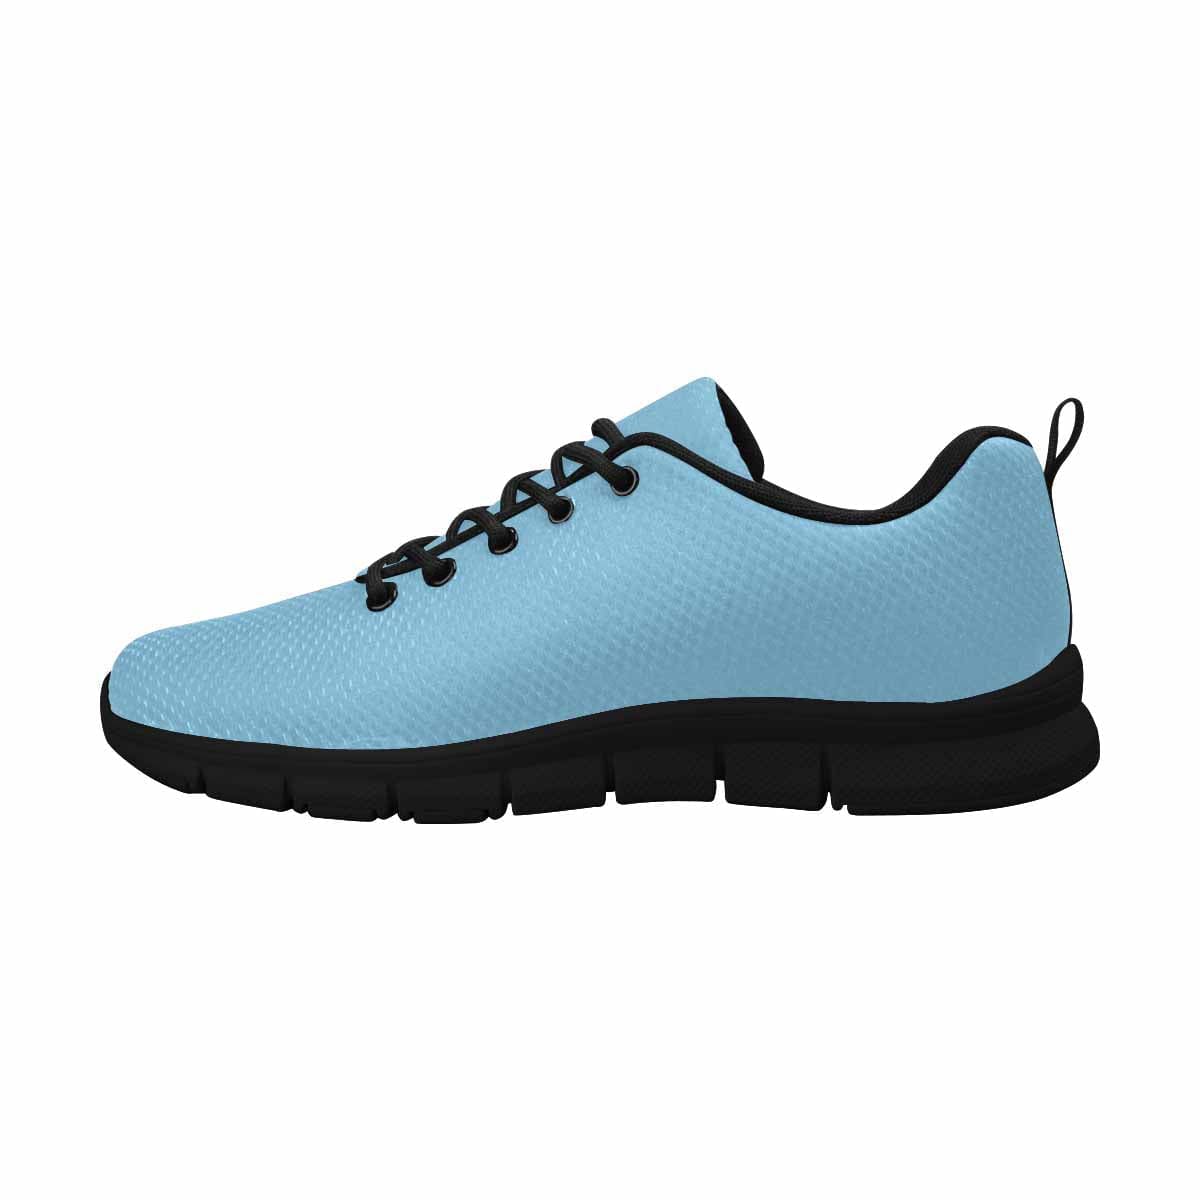 Sneakers For Men Light Blue - Canvas Mesh Athletic Running Shoes - Mens